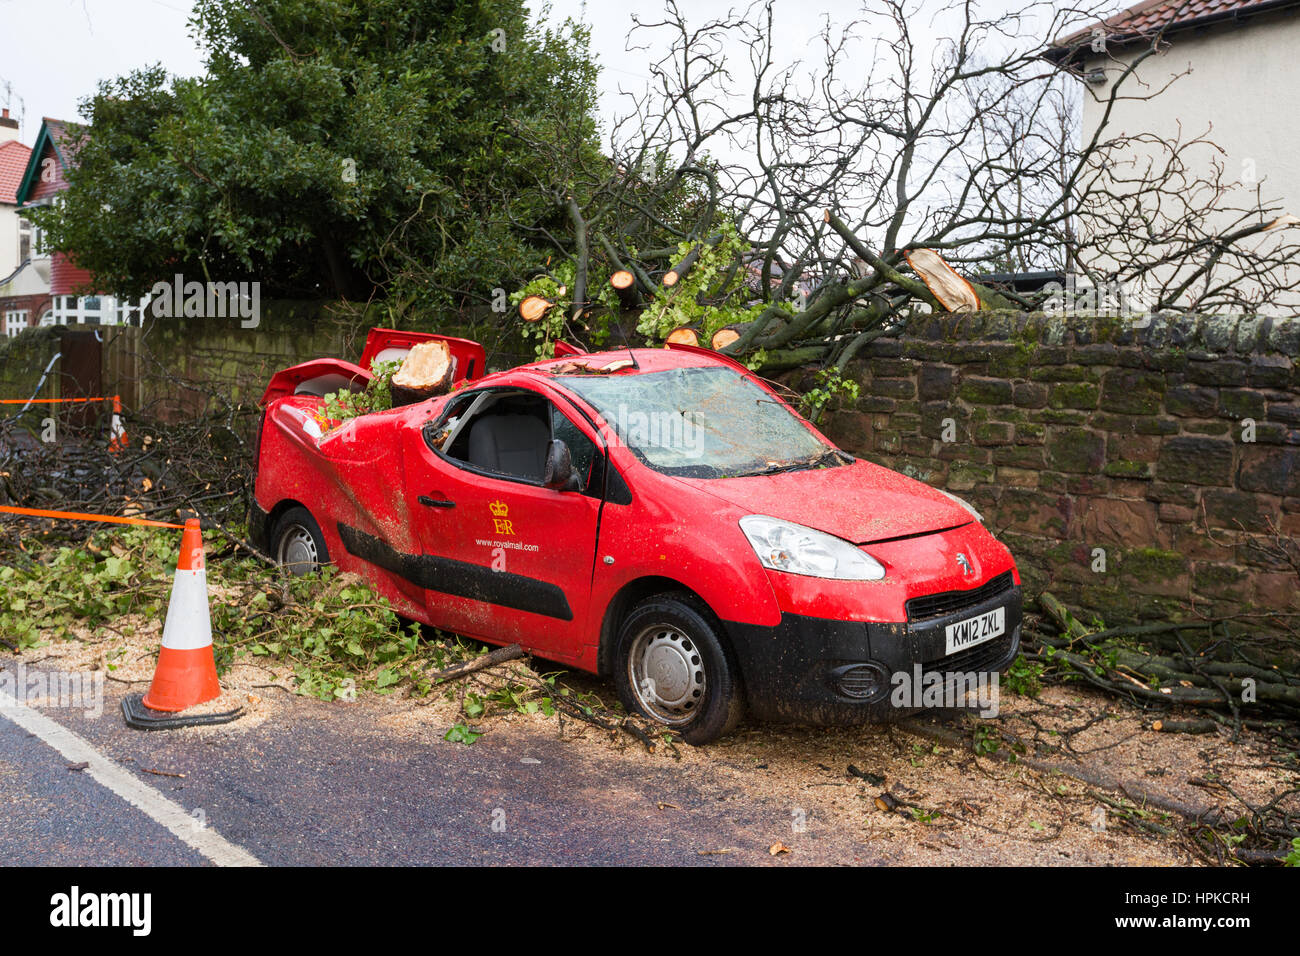 Liverpool, UK. 23rd Feb, 2017. A tree fell onto an unoccupied Royal Mail van on Thursday, February 23, 2017 on St Anne's Road in Aigburth, Liverpool as Storm Doris batters the UK. Credit: Christopher Middleton/Alamy Live News Stock Photo